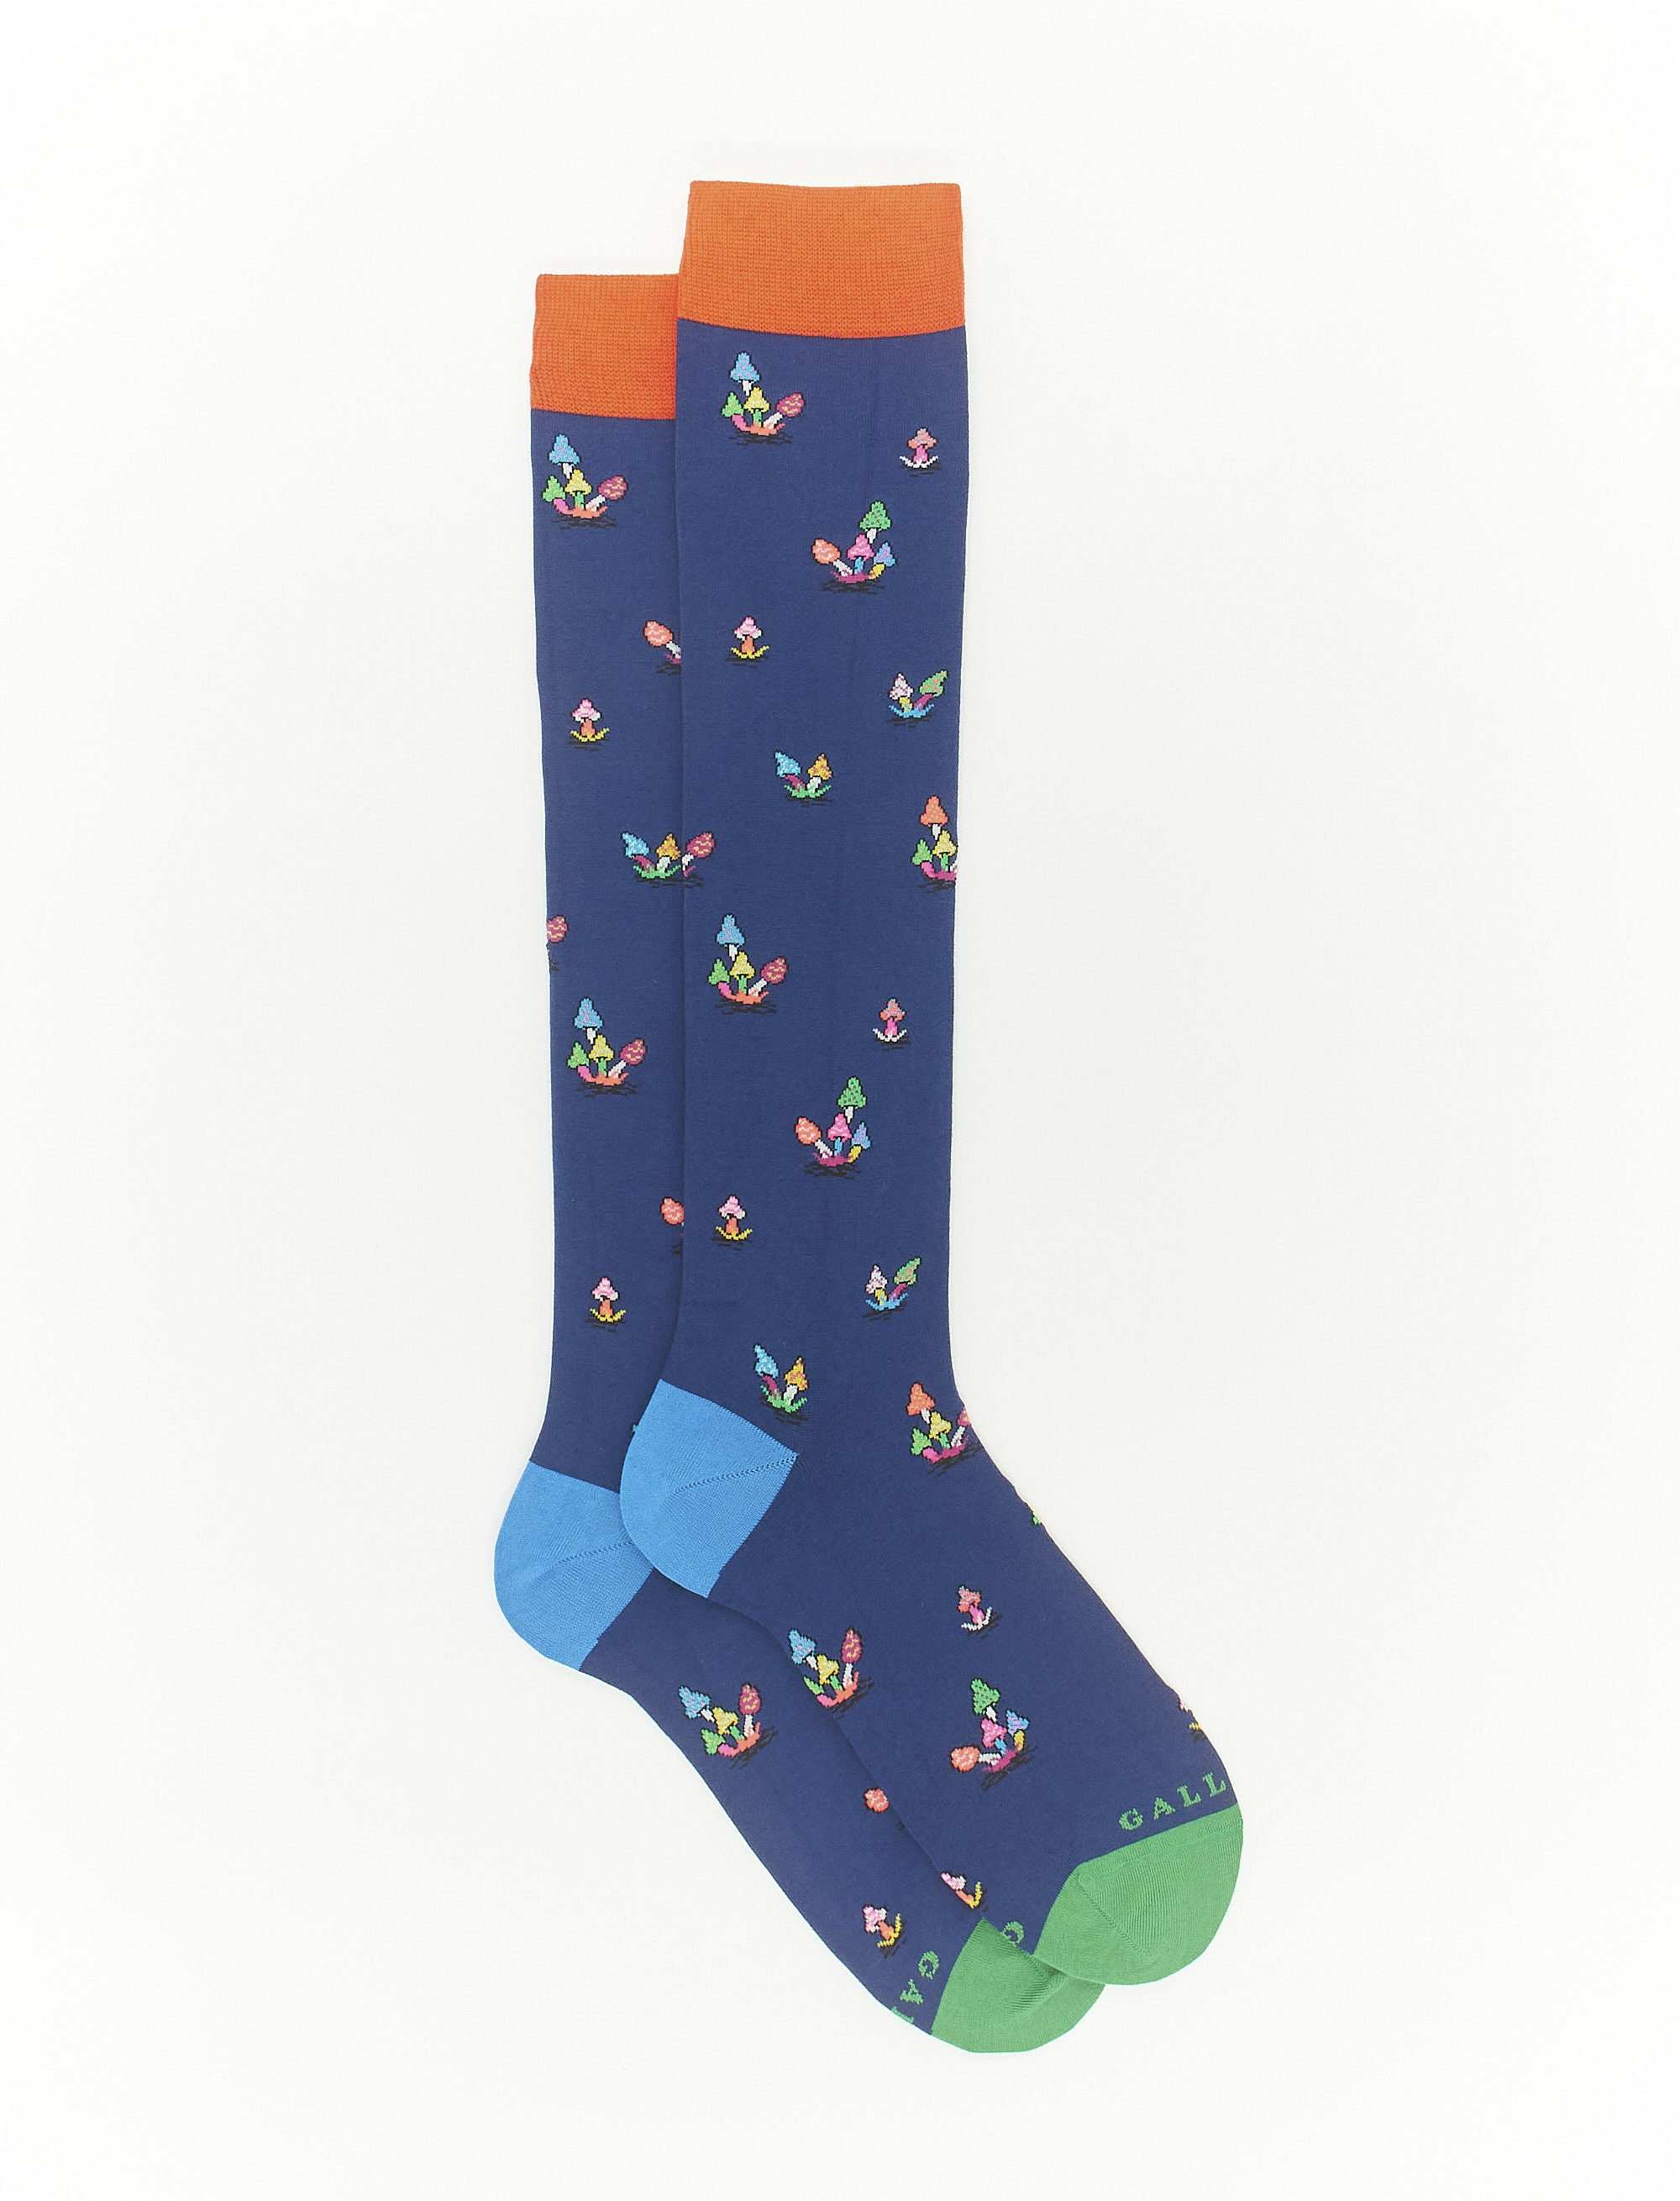 Women's long English blue light cotton socks with mushroom motif - The FW Edition | Gallo 1927 - Official Online Shop